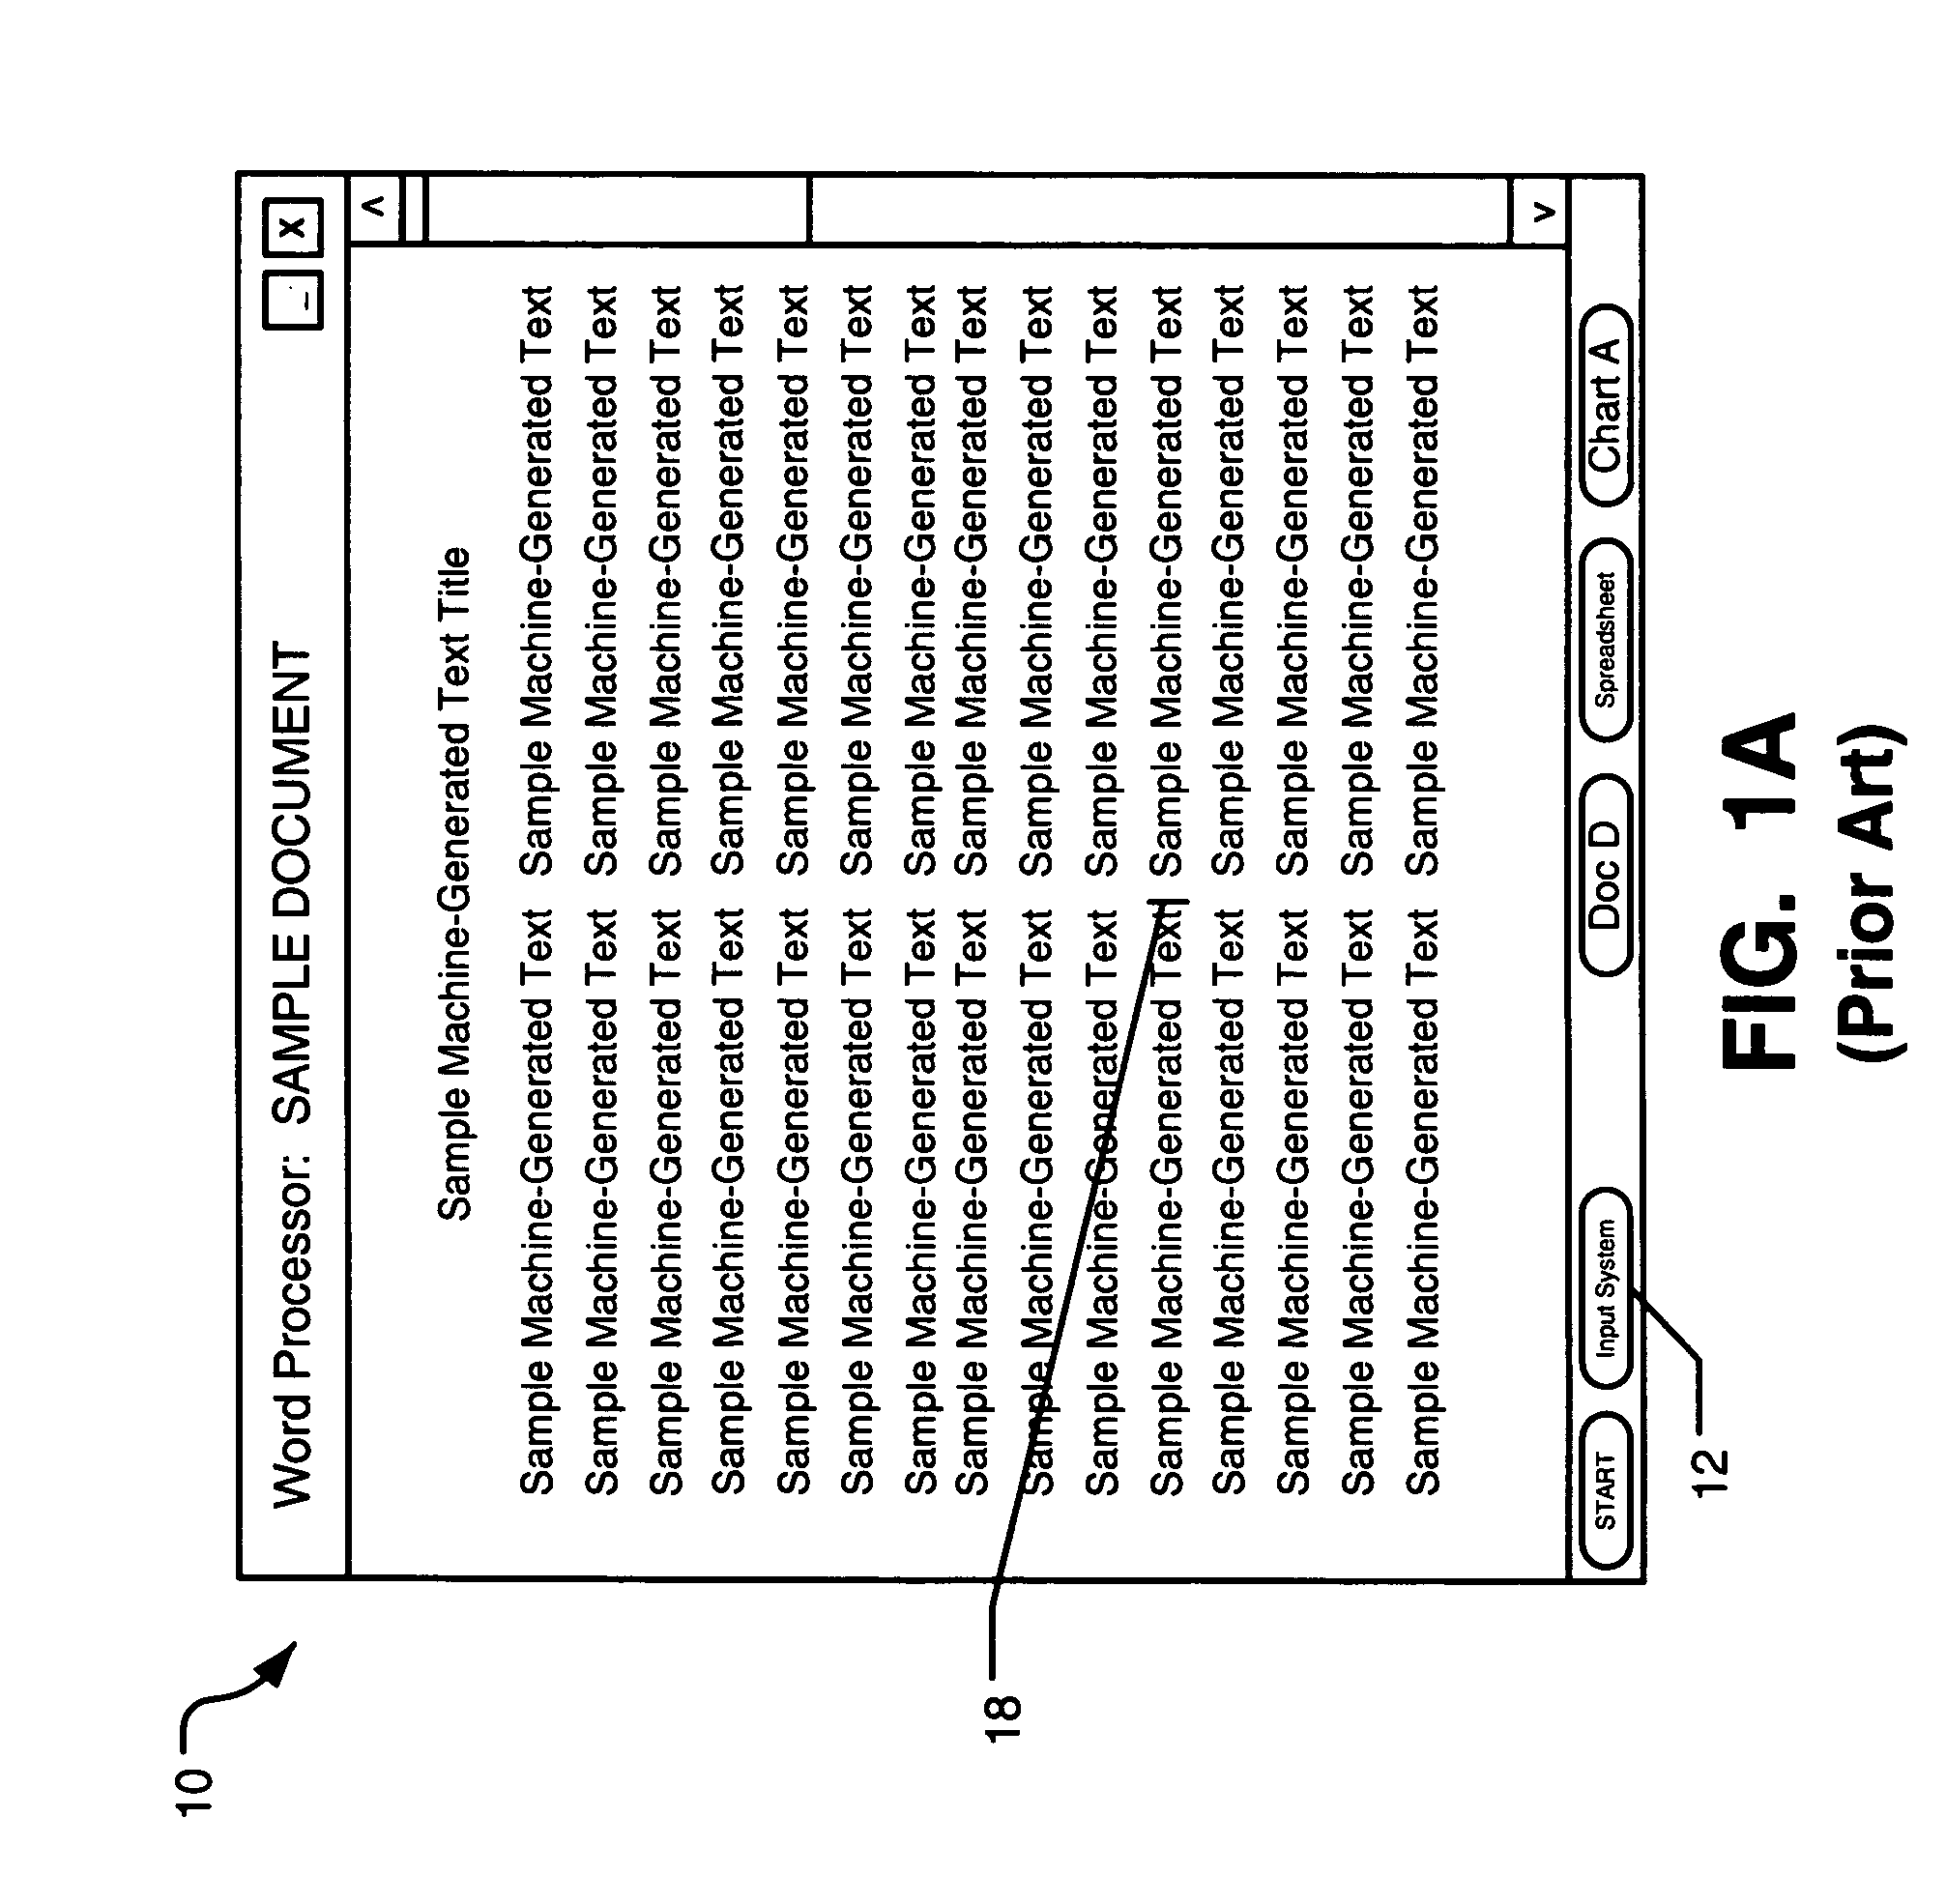 Systems, methods, and computer-readable media for invoking an electronic ink or handwriting interface